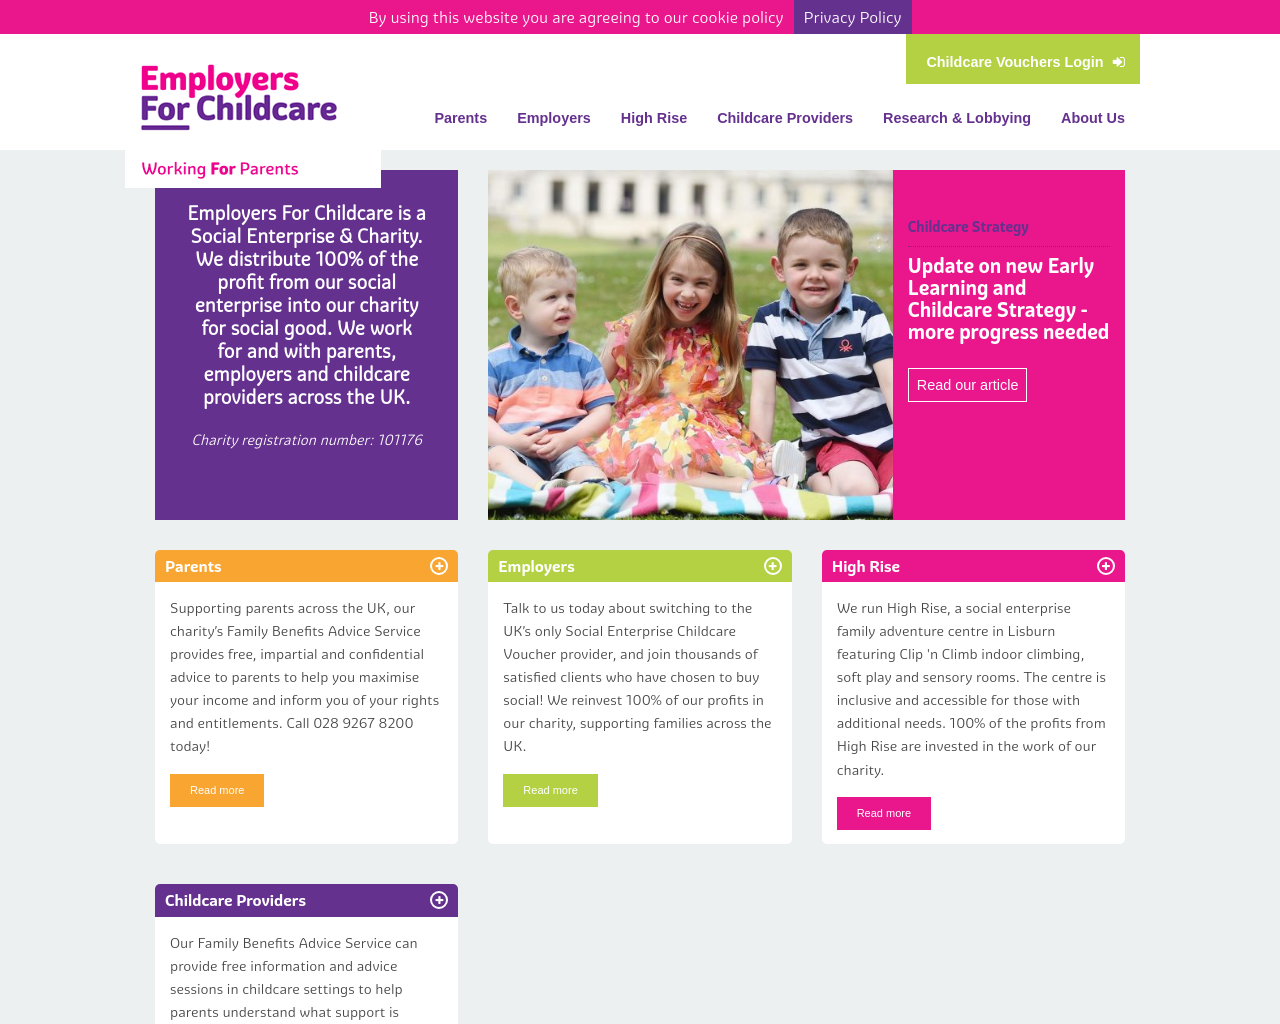 Employer For Childcare